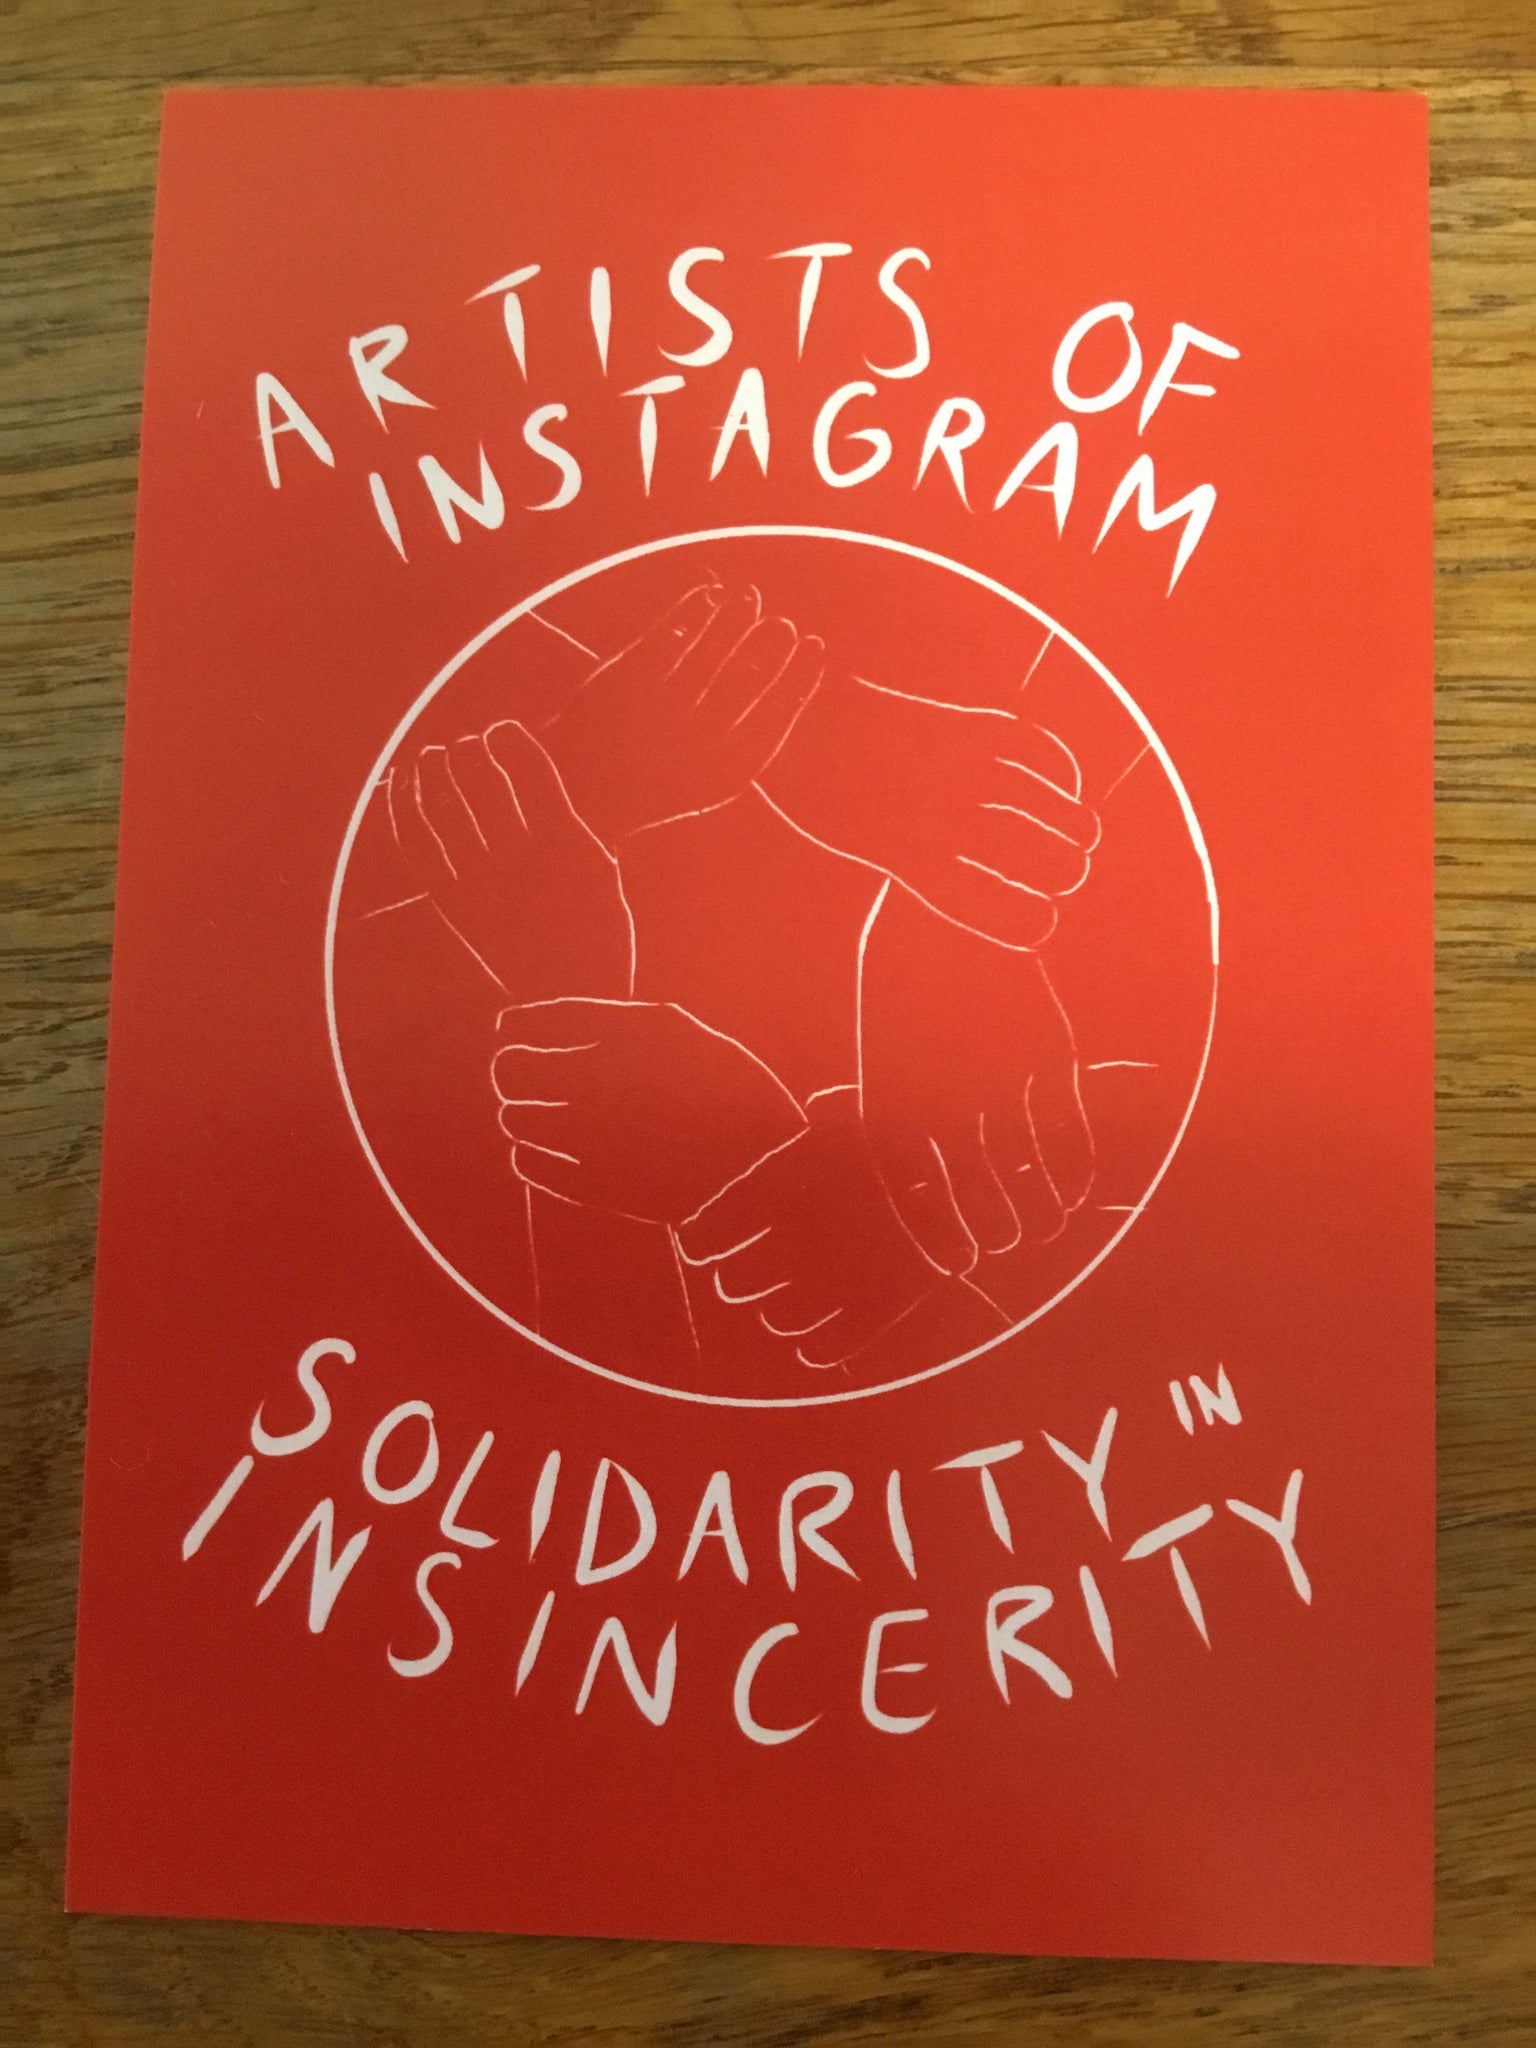 'Artists of Instagram Solidarity in Insincerity' Postcard by Bedwyr Williams